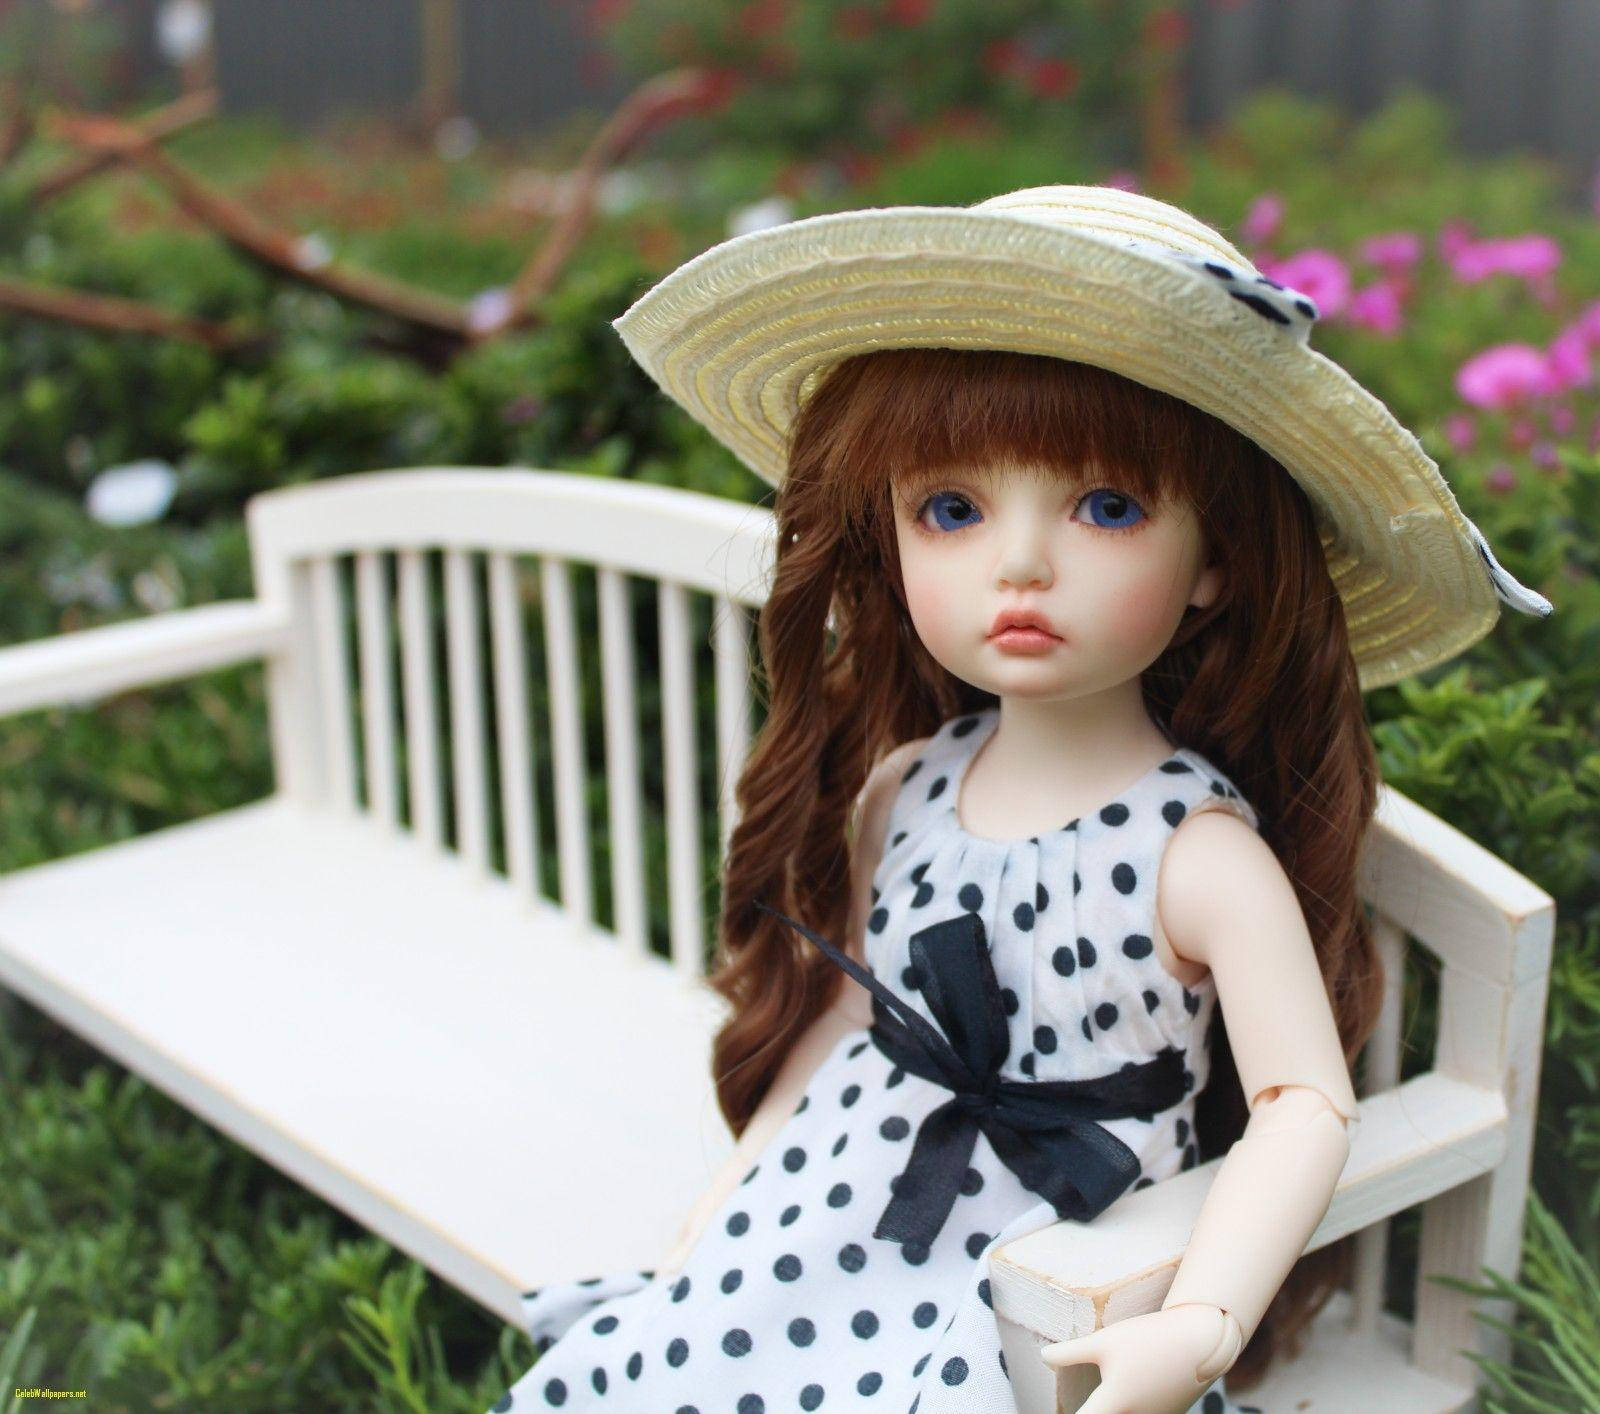 Cute Doll On Bench Background